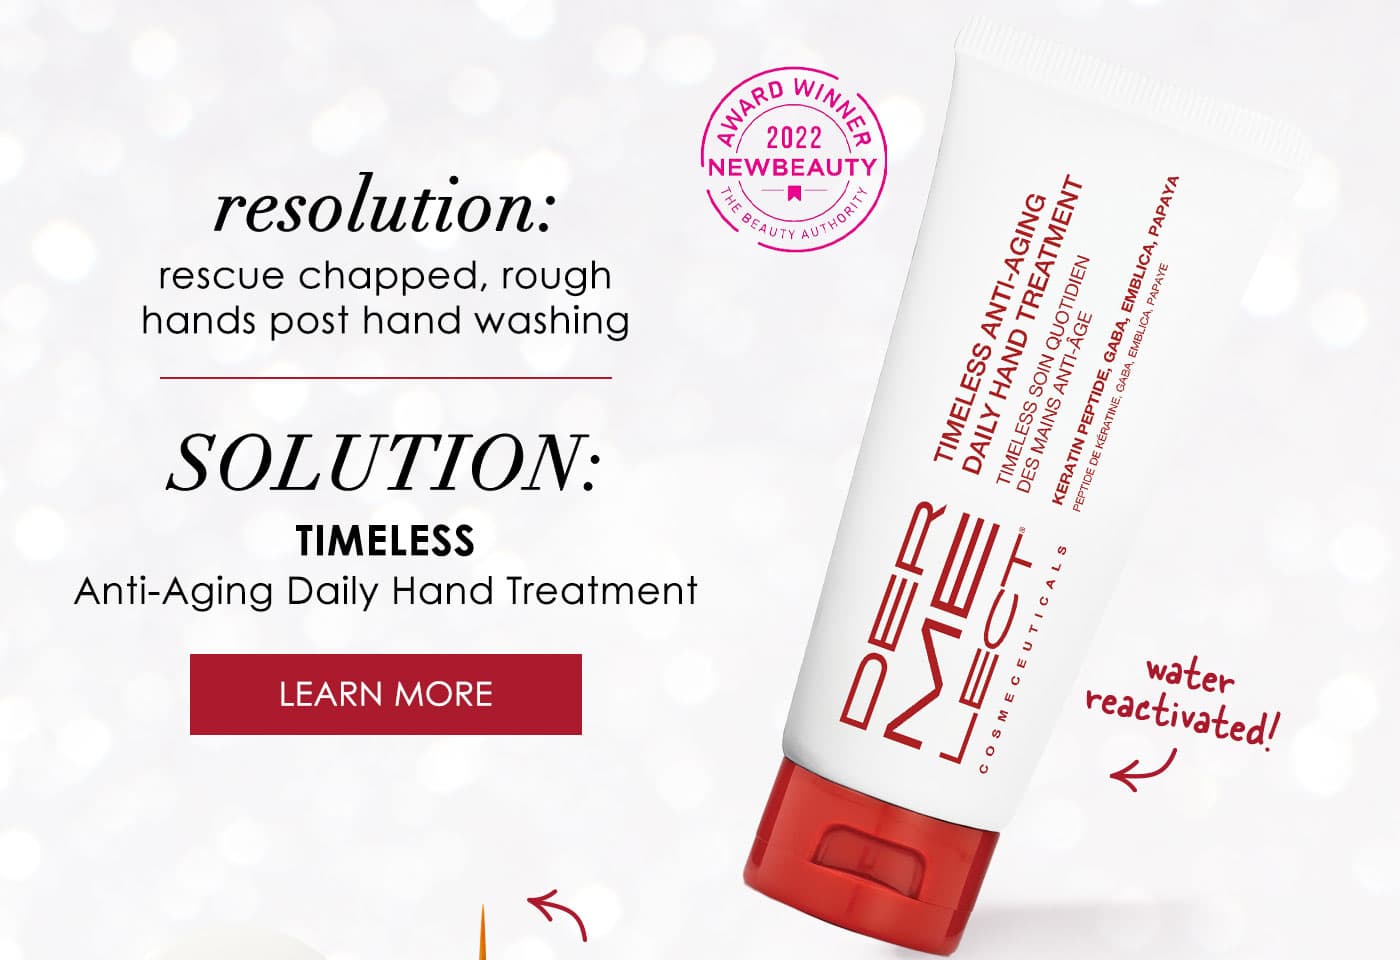 TIMELESS Anti-Aging Daily Hand Treatment